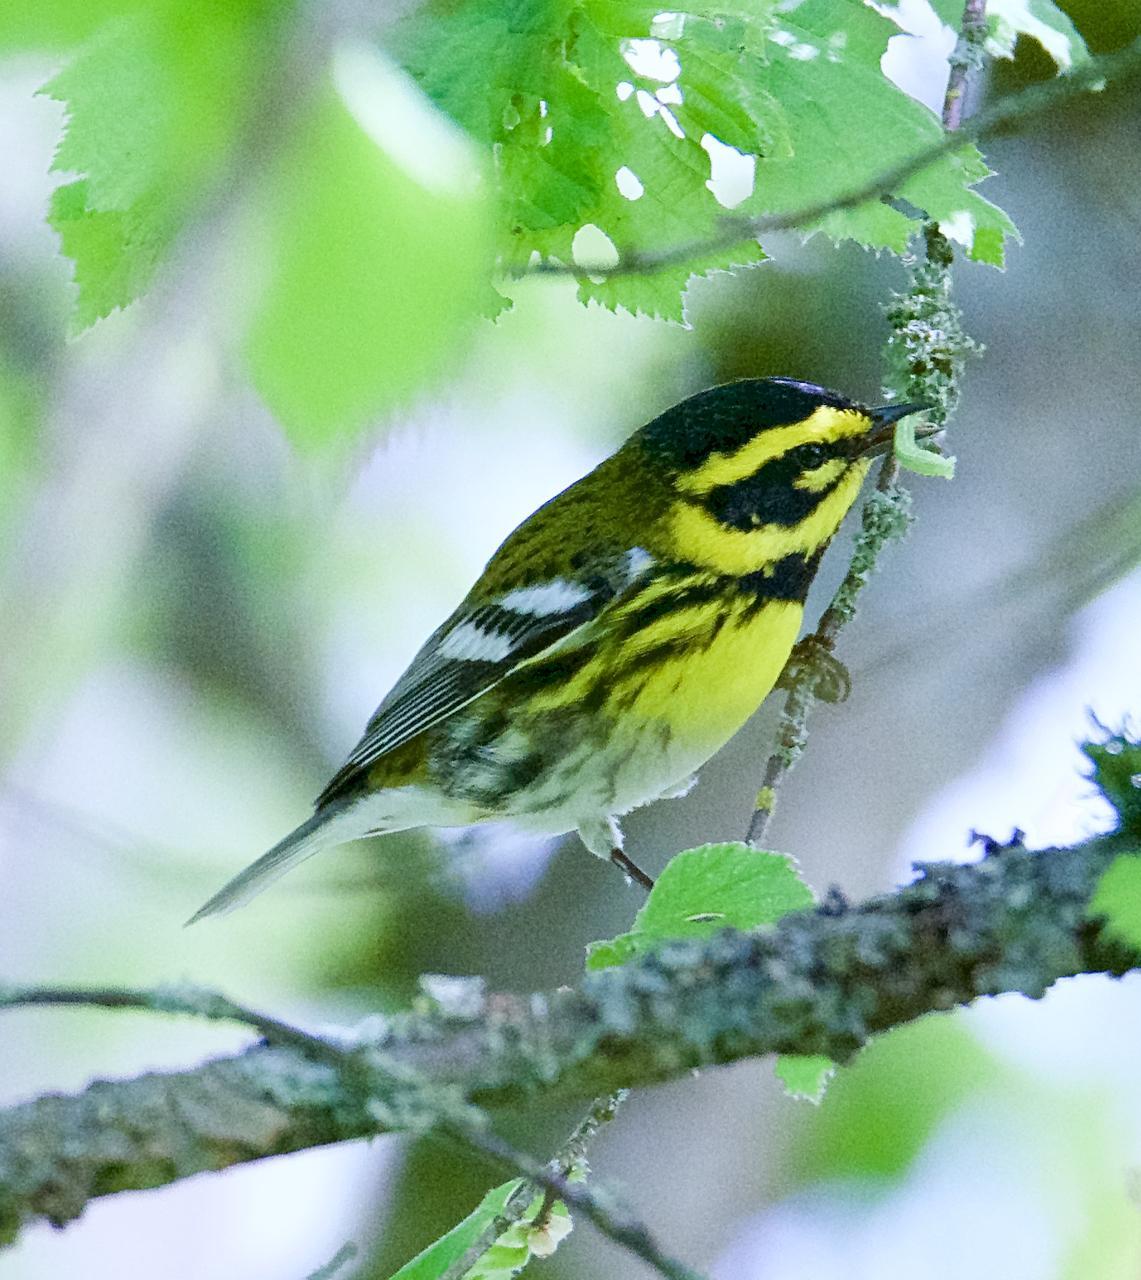 Townsend's Warbler Photo by Brian Avent